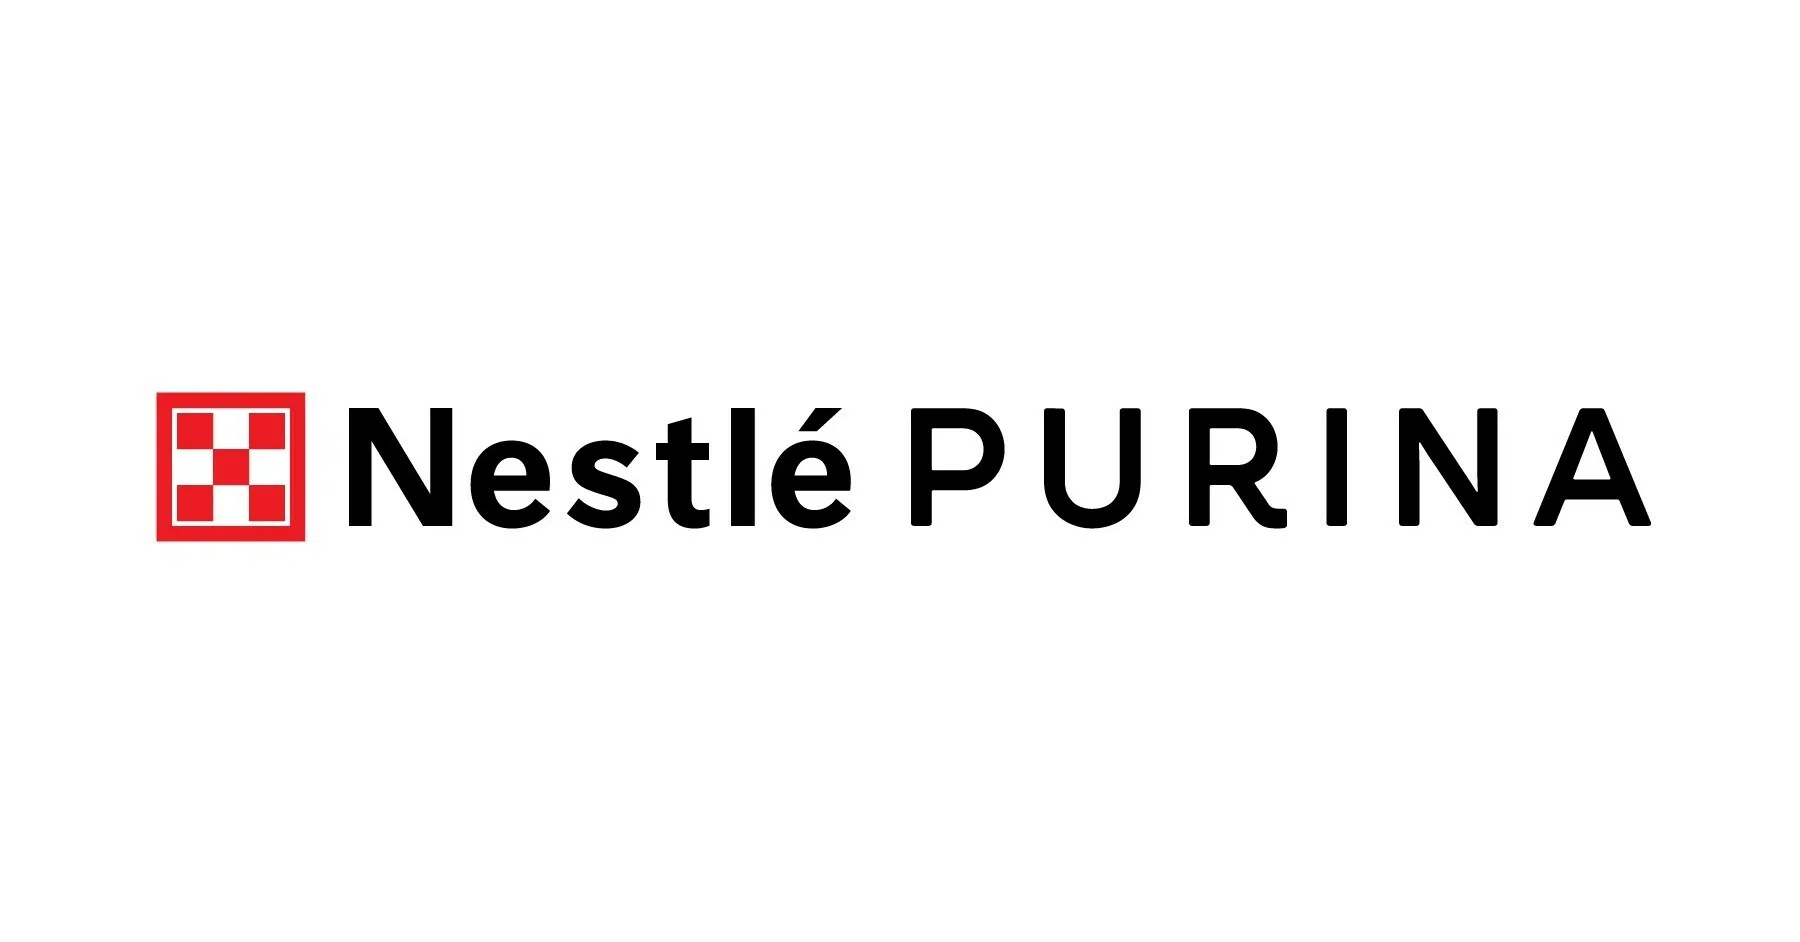 Nestle Purina Plant Expansion Brings 100 Jobs to Jefferson County